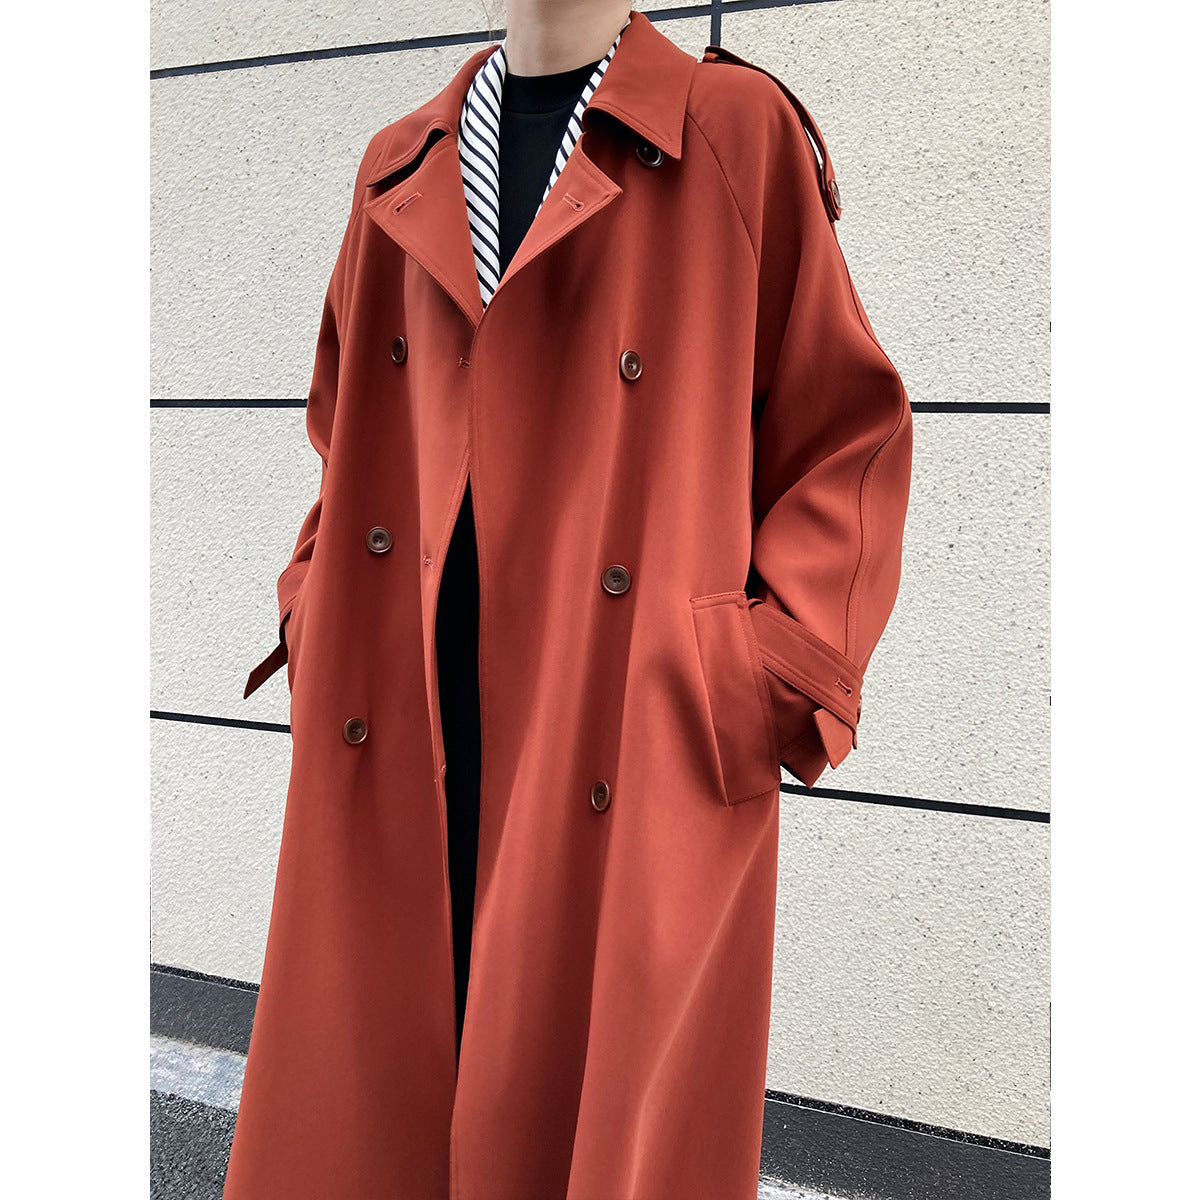 Fashion Fall Wind Break Long Overcoats for Women-Outerwear-Red-S-Free Shipping at meselling99